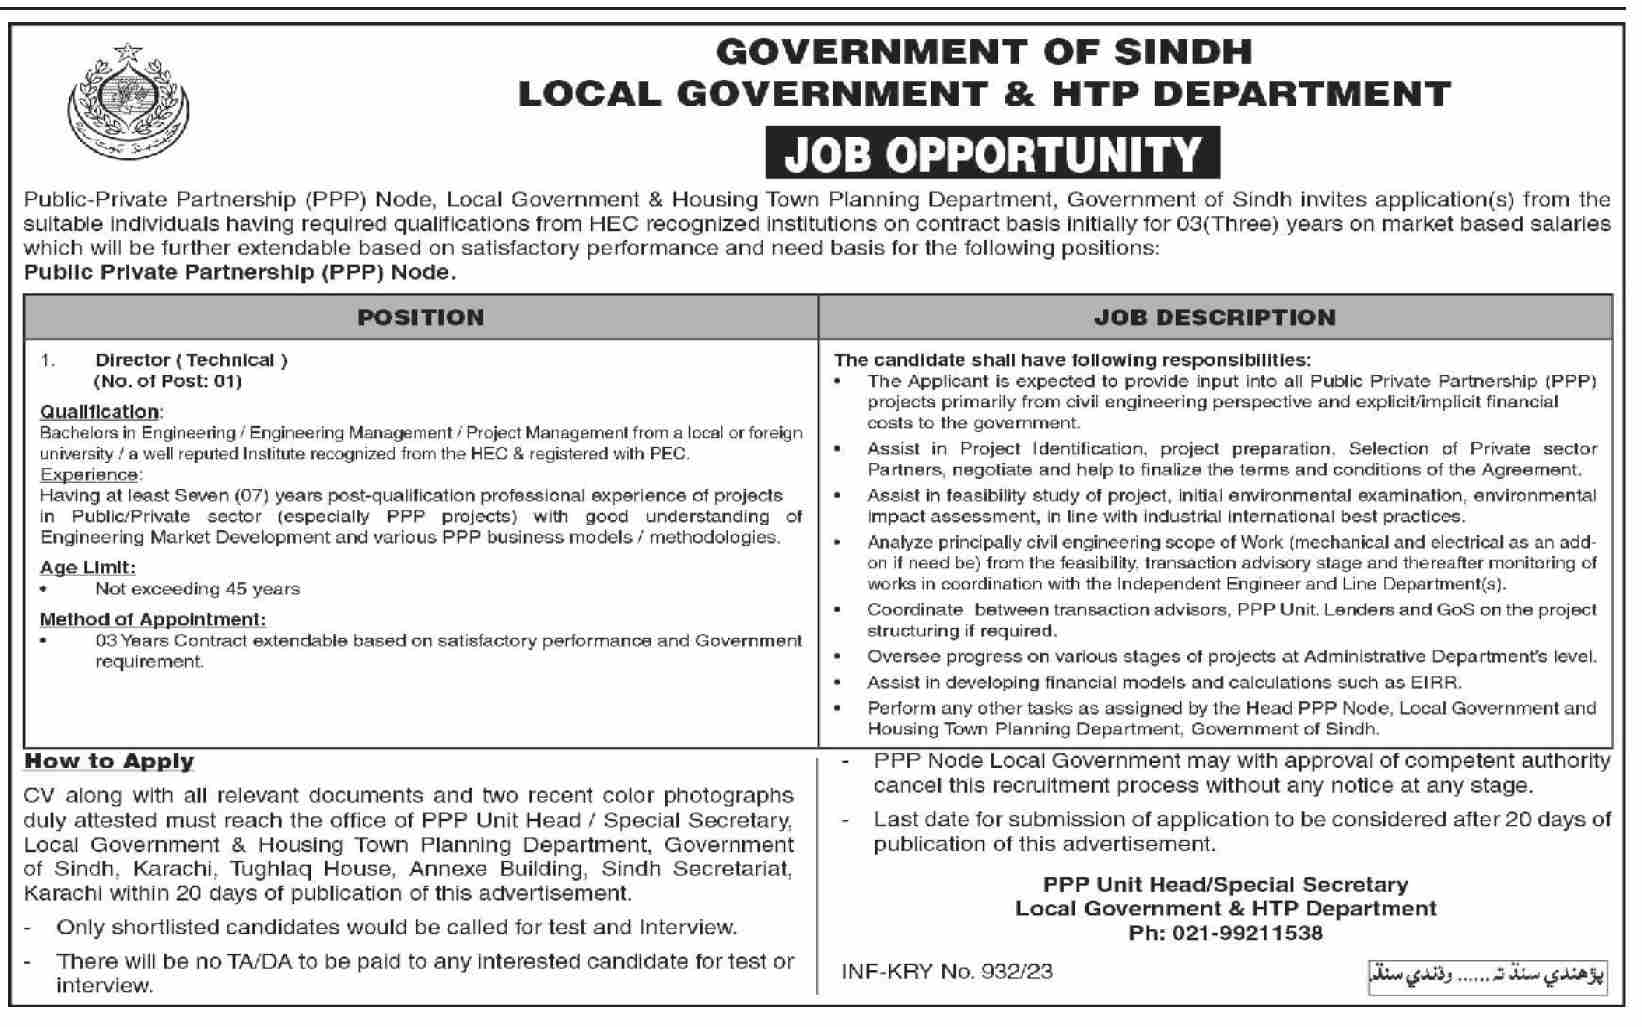 JOB OF DIRECTOR TECHNICAL IN GOVERNMENT OF SINDH LOCAL GOVERNMENT & HTP DEPARTMENT